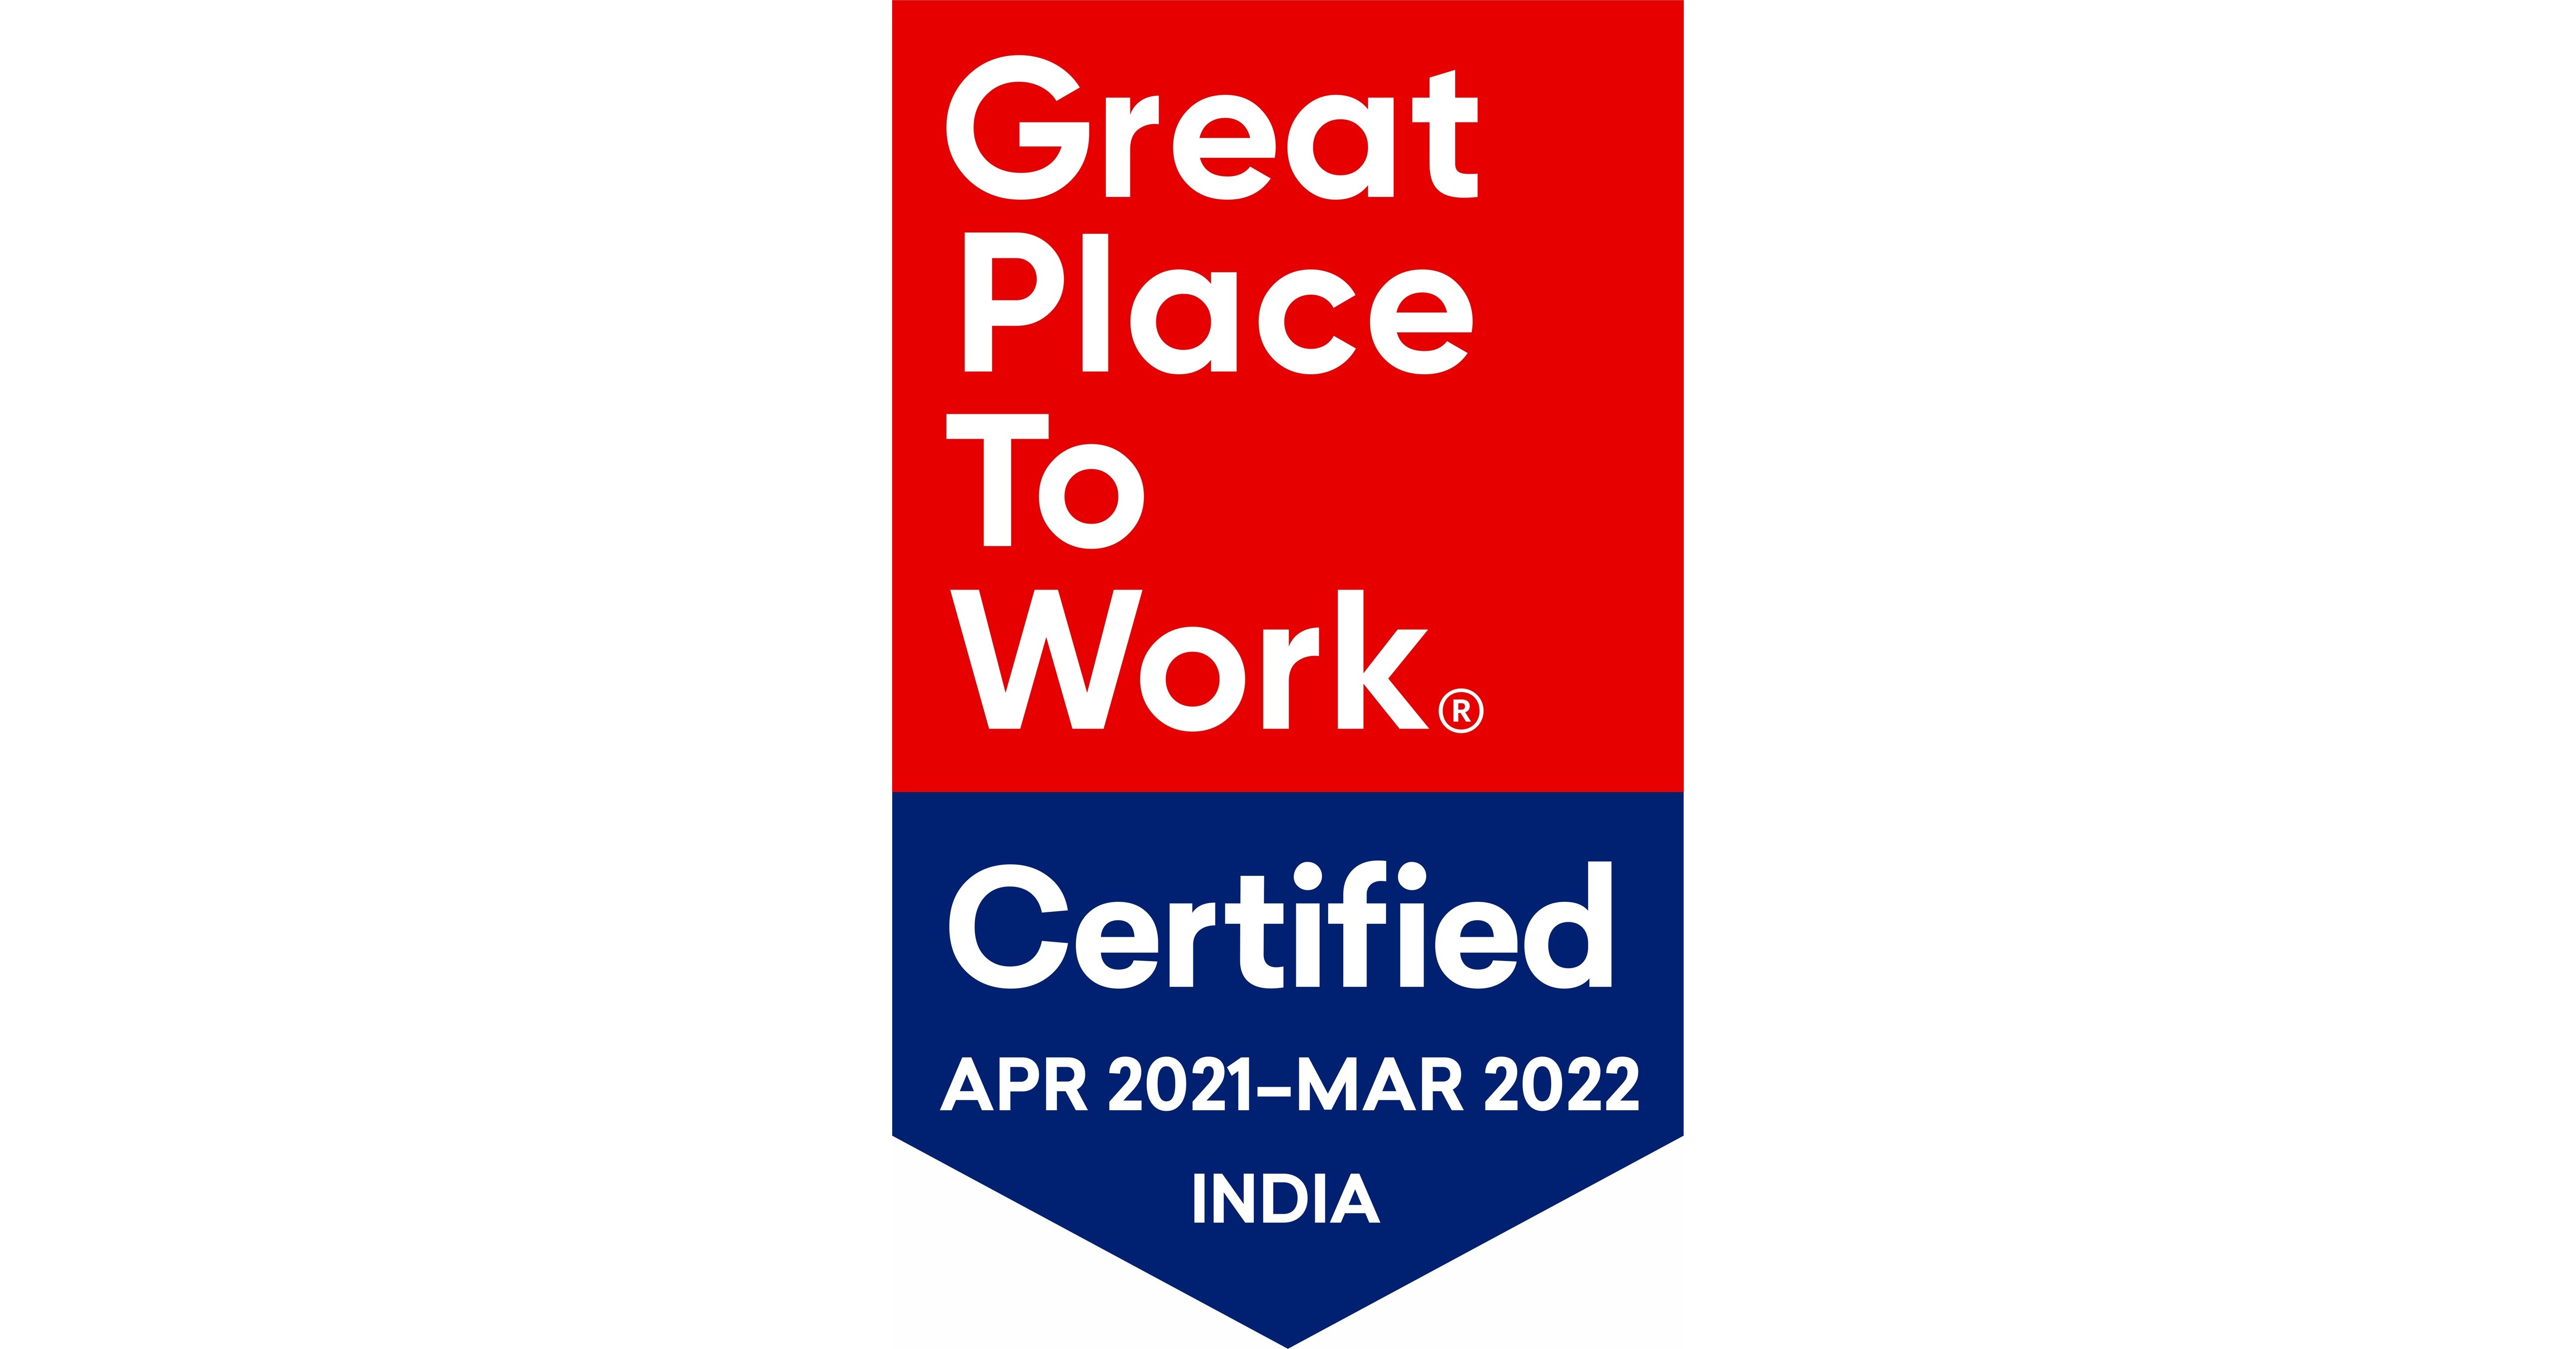 Prodapt is Proud to be Certified as a Great Place to Work® in